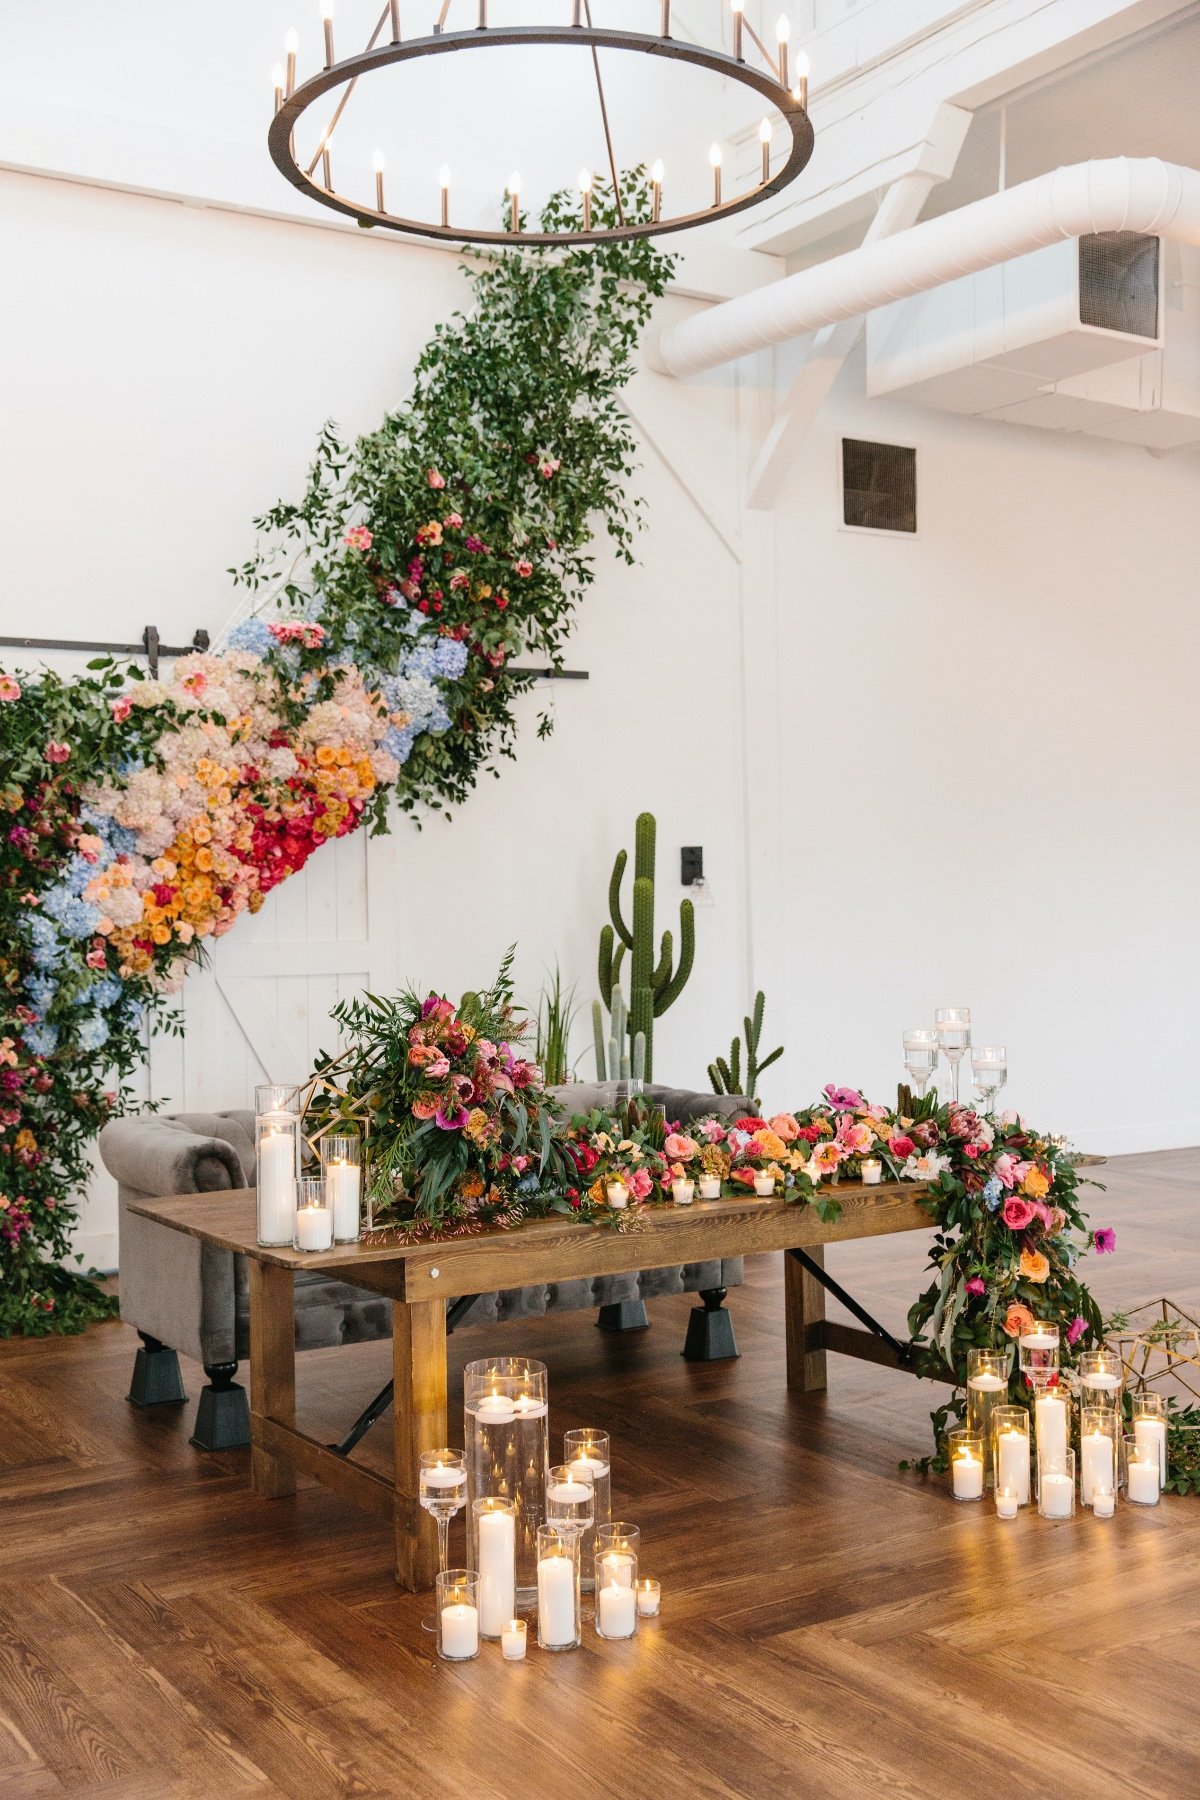 Sweetheart table design ideas with bright florals and candles